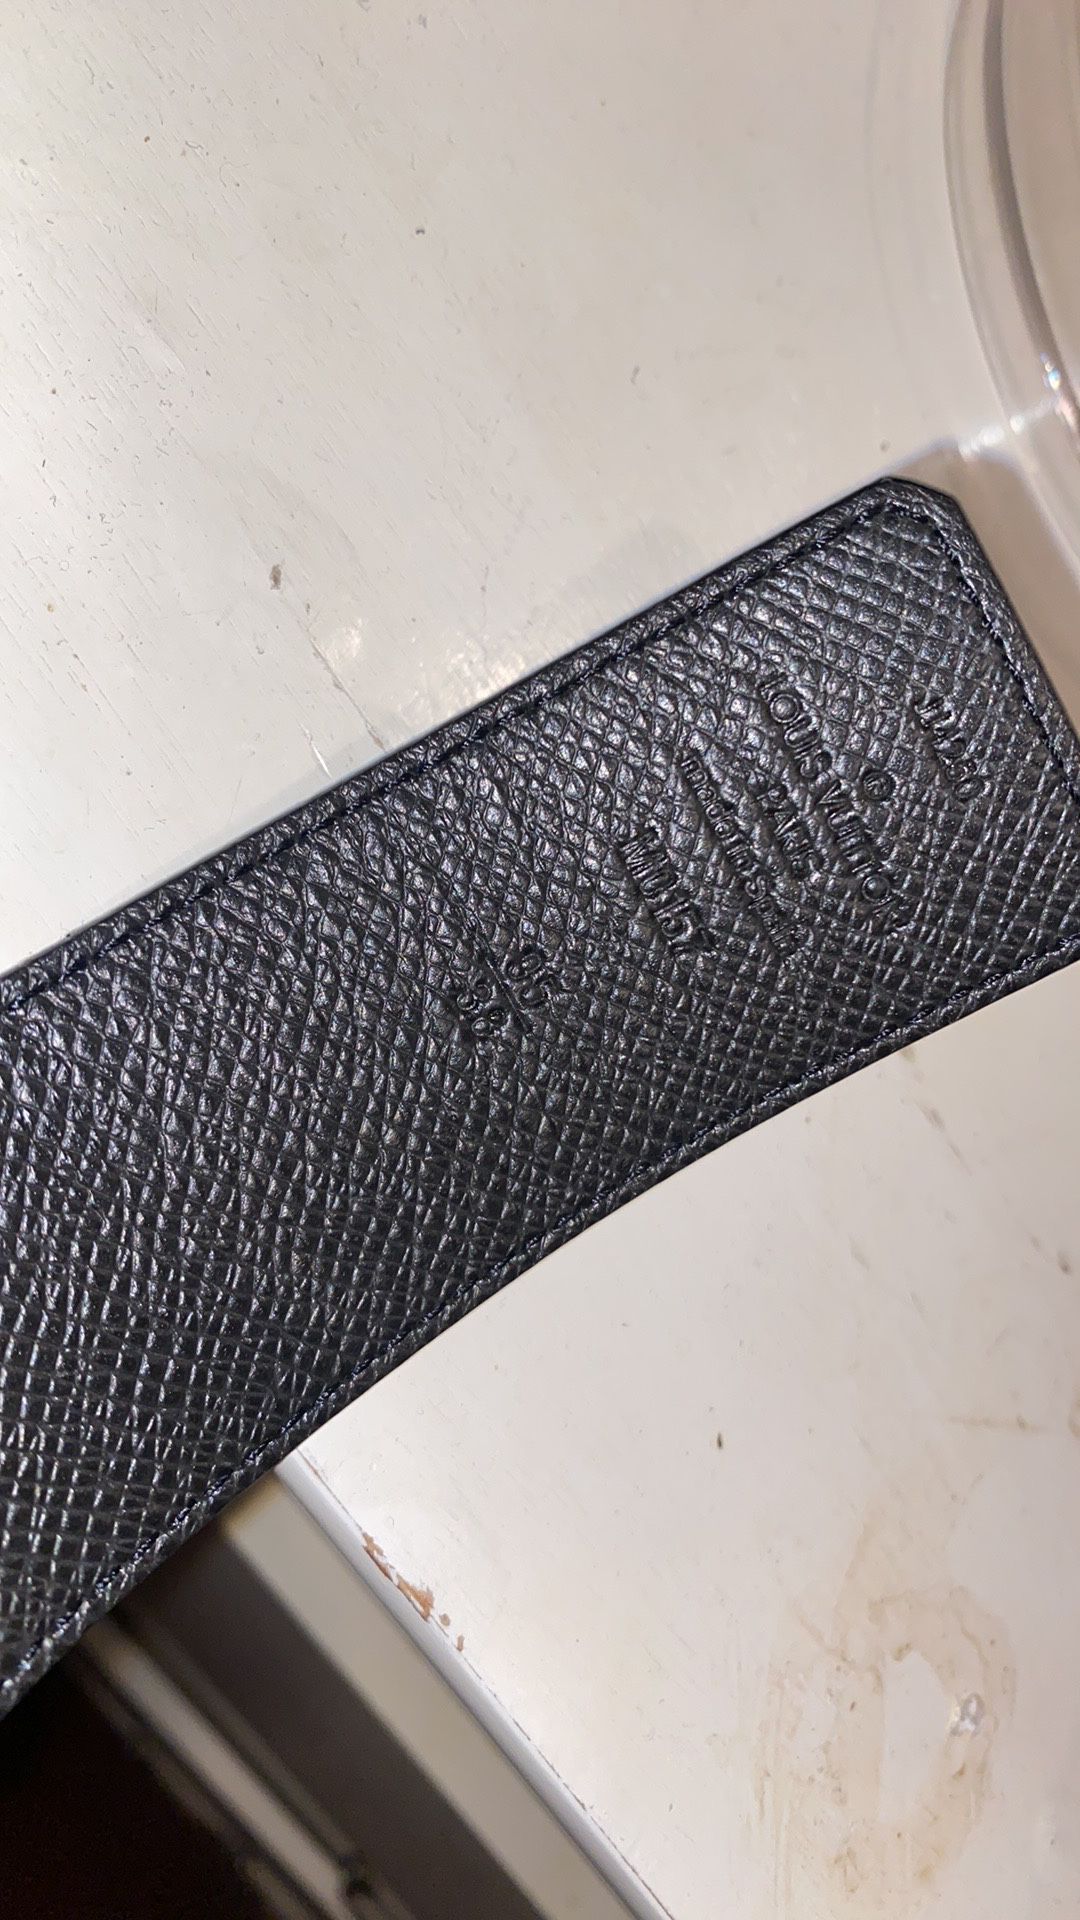 LV Belt for Sale in The Bronx, NY - OfferUp